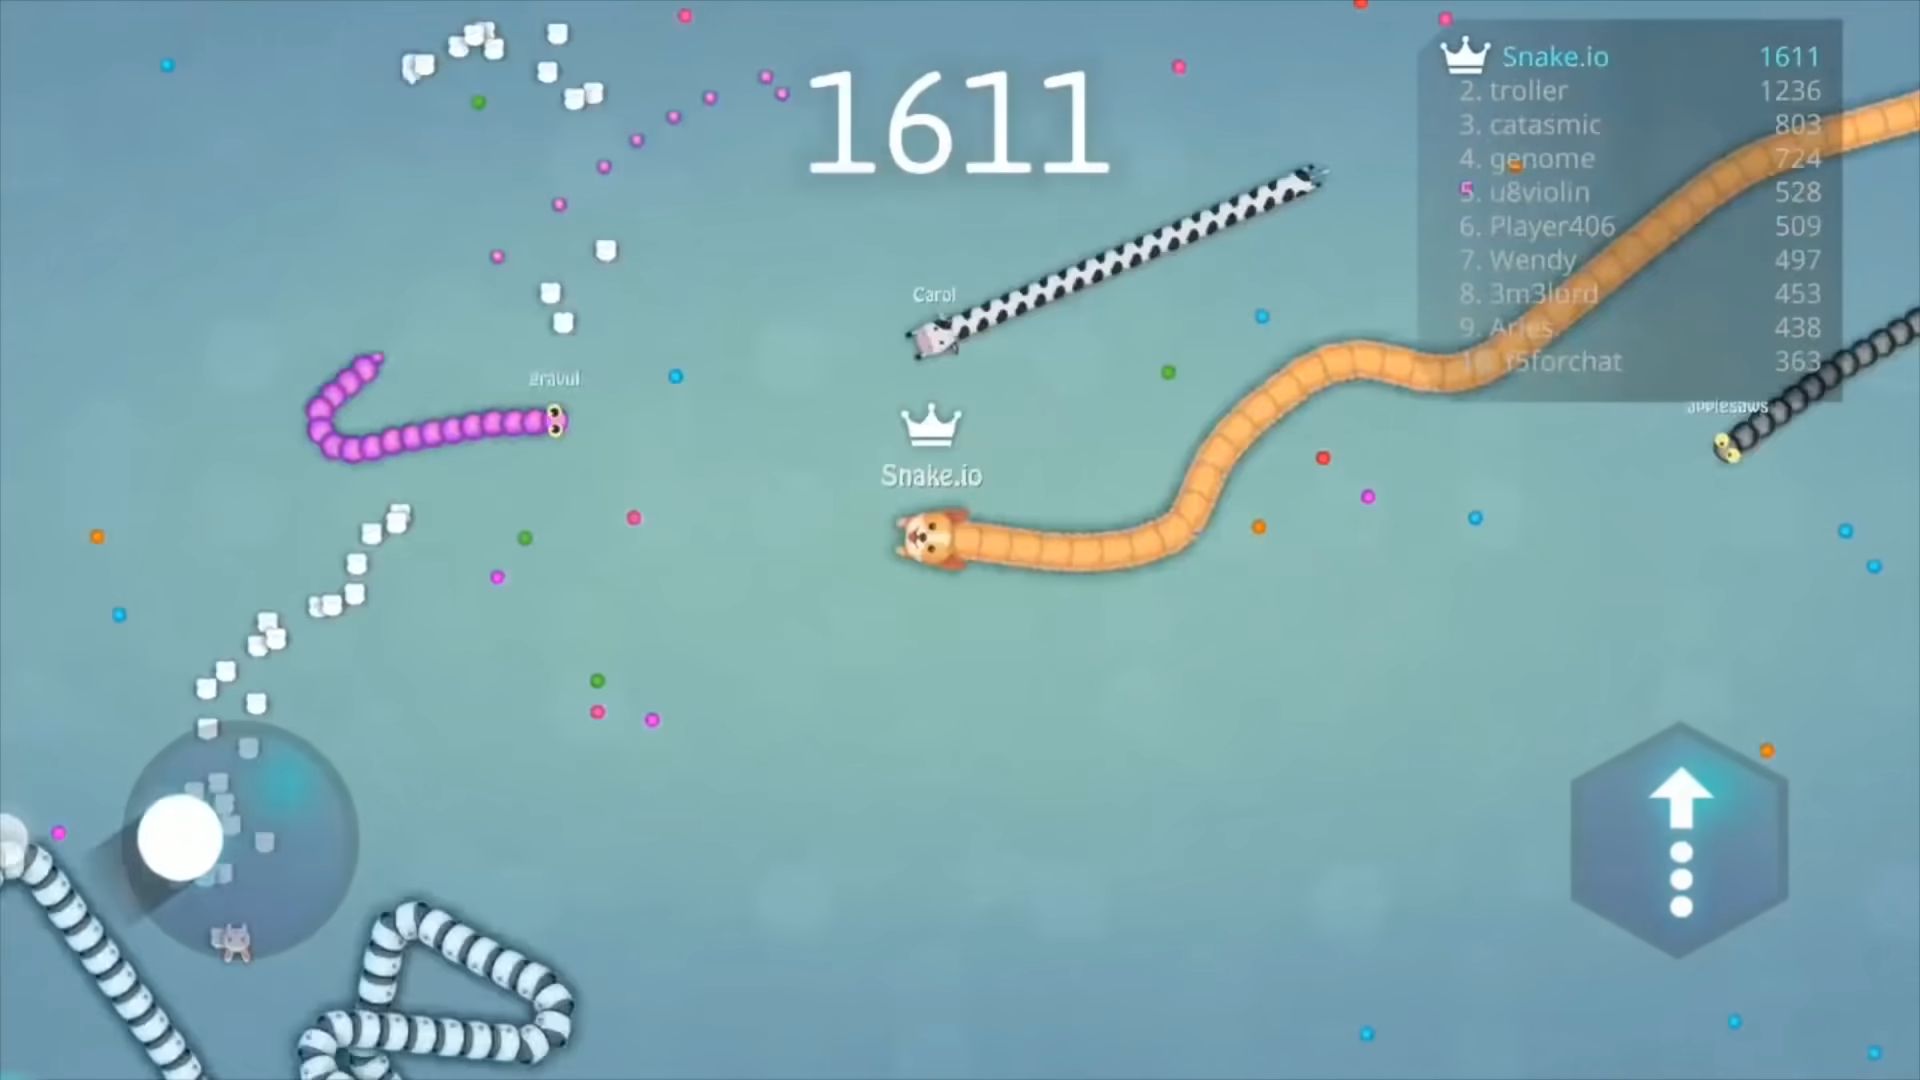 Slither.io APK (Android Game) - Free Download